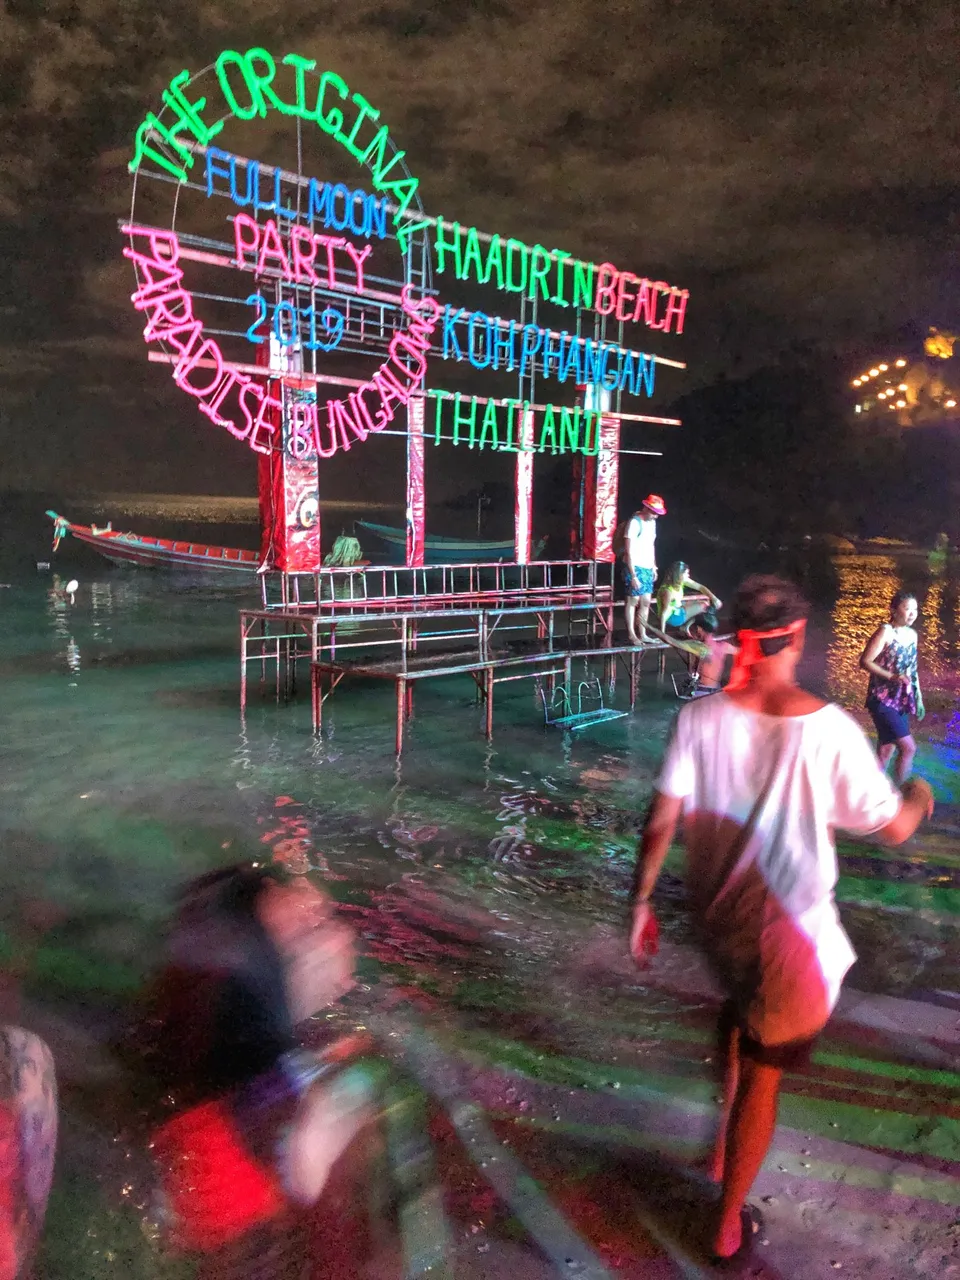 Get wet in the seas at the Full Moon Party.